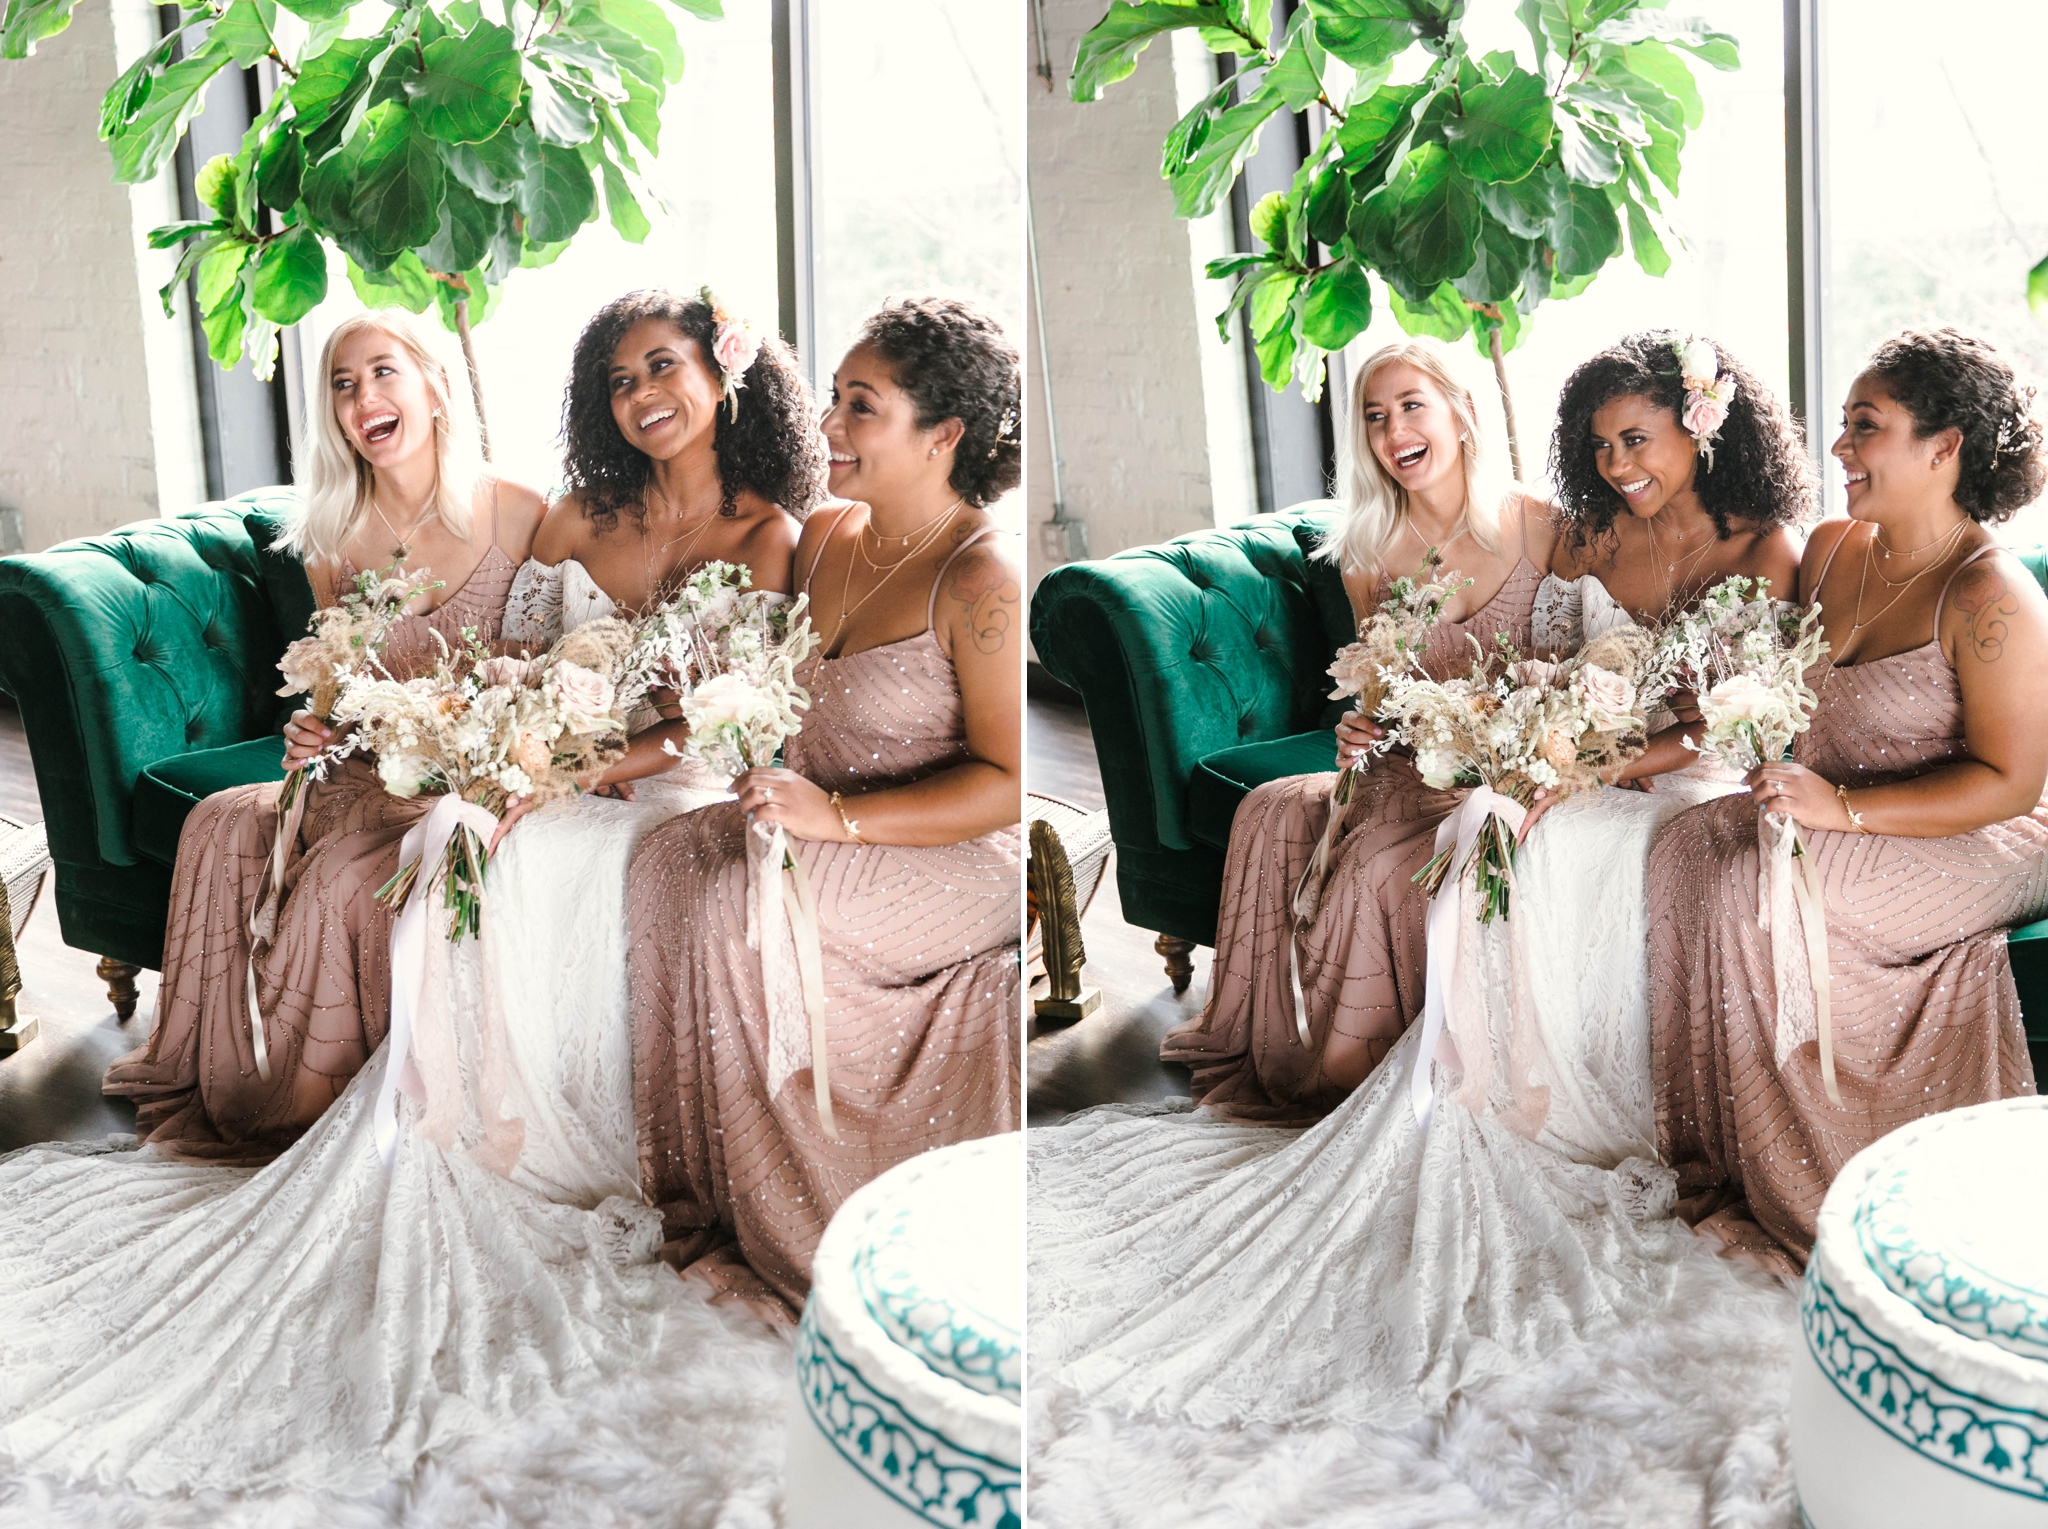  Indoor Natural light portrait of a black bride and her bridesmaids in a boho wedding dress with light pink bridesmaids dresses sitting on an emerald tufted sofa - laughing and having fun with each other-  flowers in natural african american hair - o